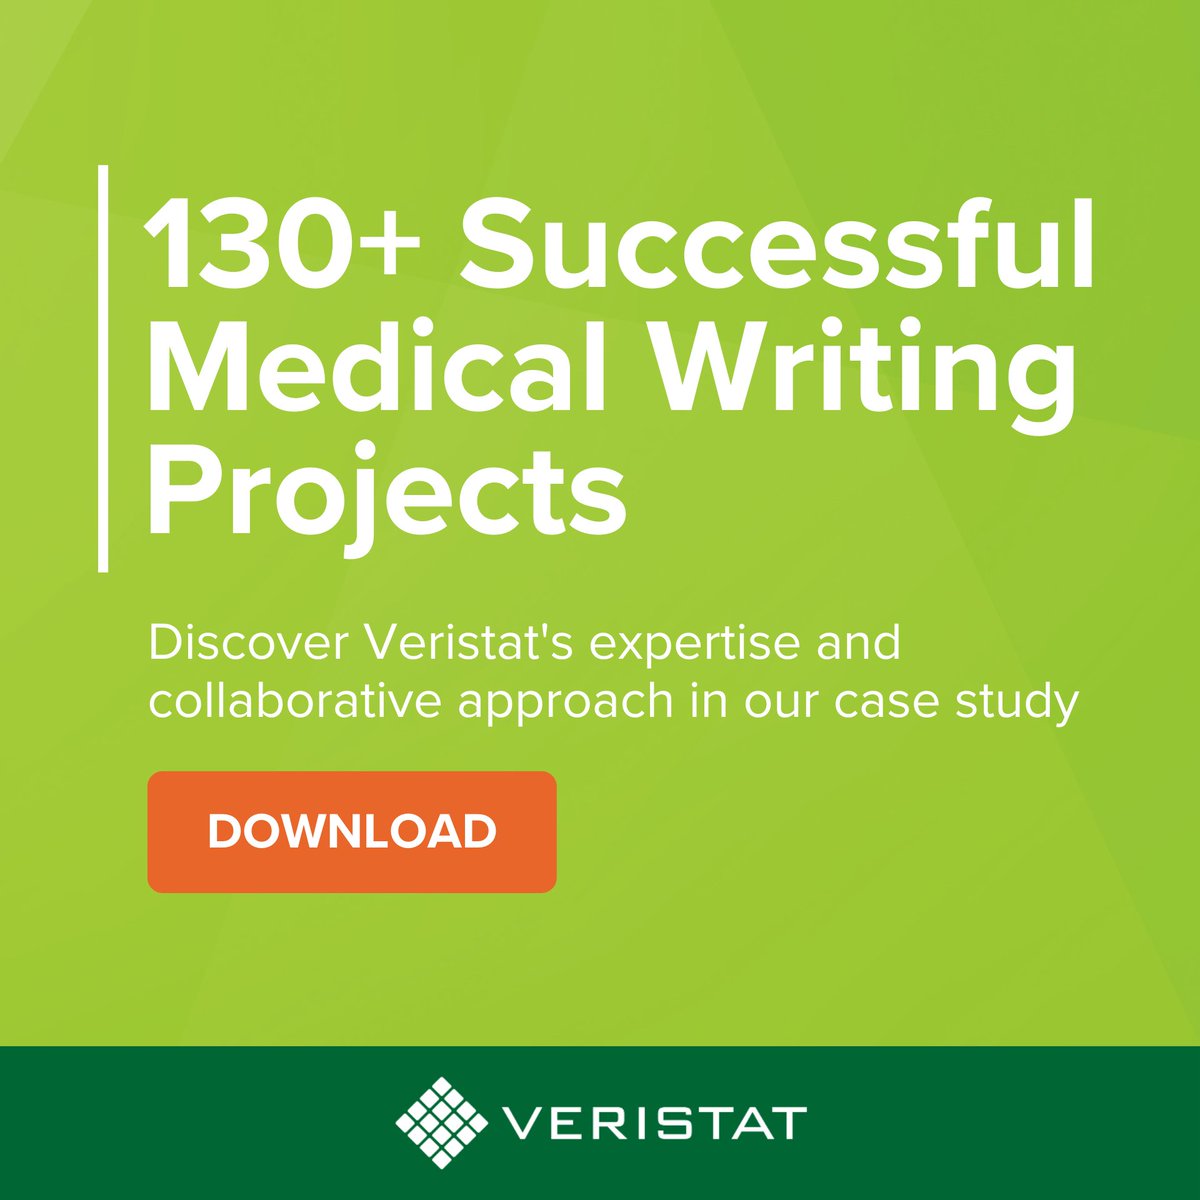 When a global specialty pharmaceutical company needed a trusted partner for their #medicalwriting needs, they turned to Veristat 🤝

Find out how we supported 130+ projects over 13 years in our case study > bit.ly/4dfYEeq